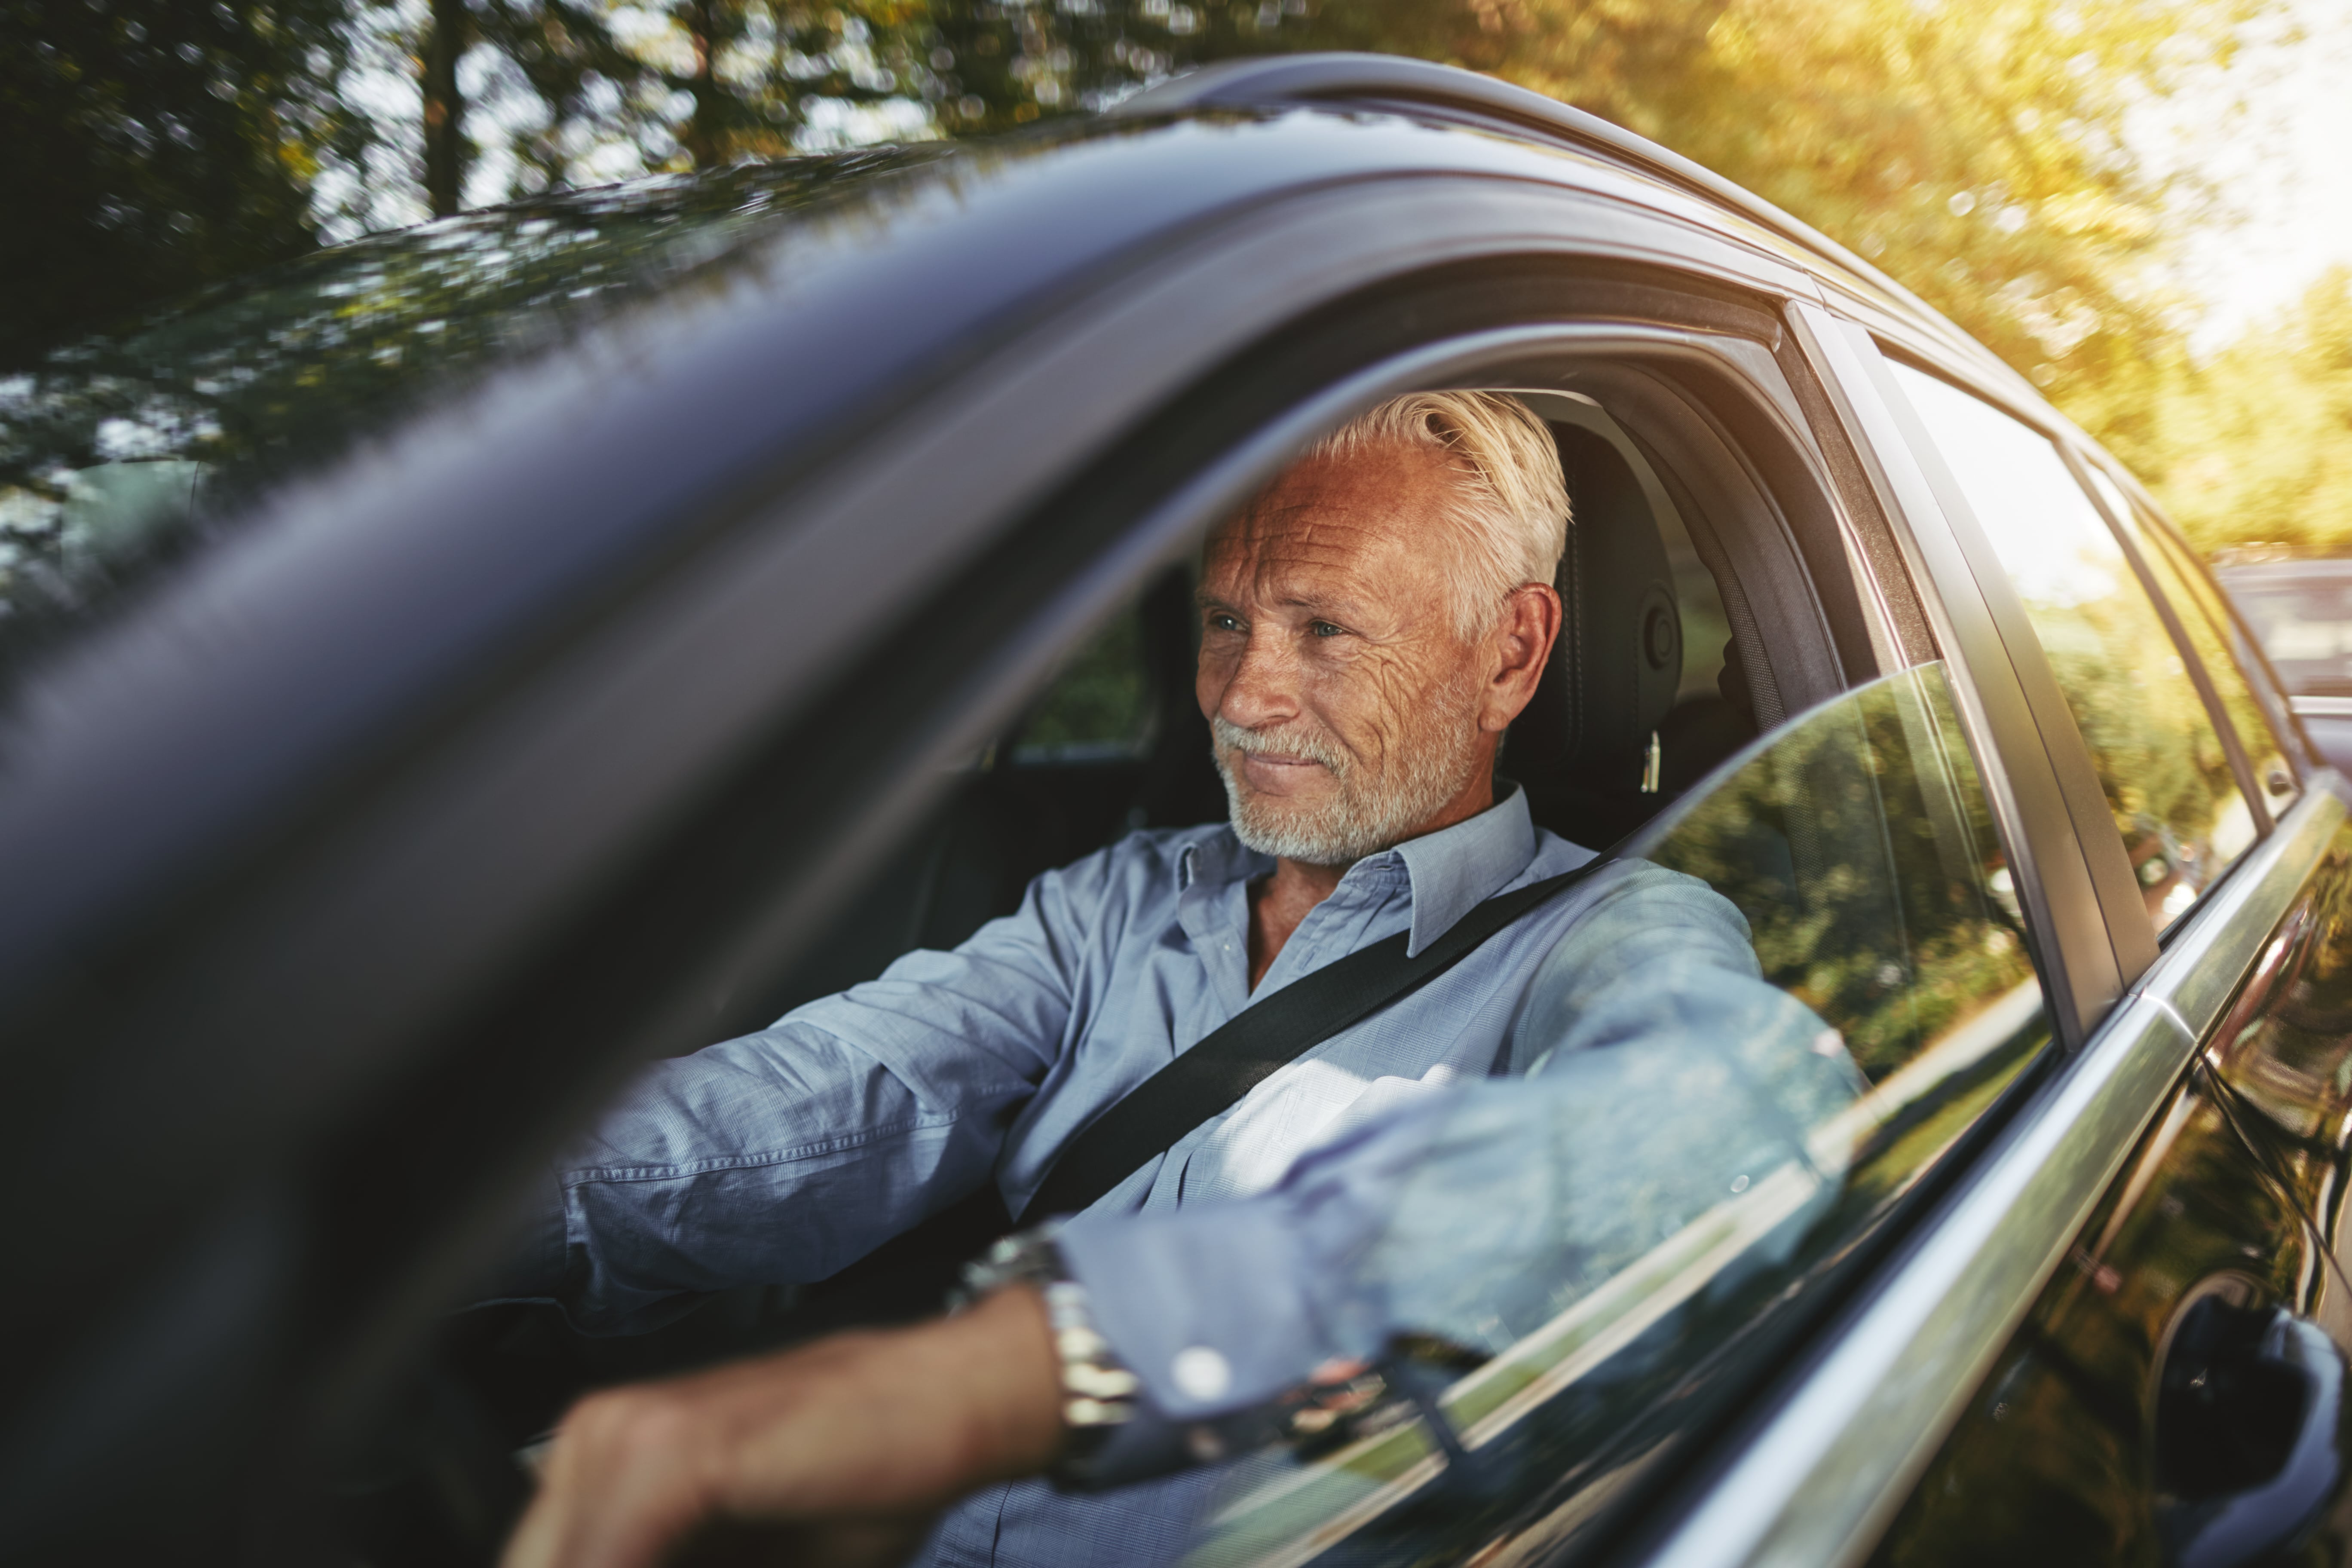 The effects of aging on driving